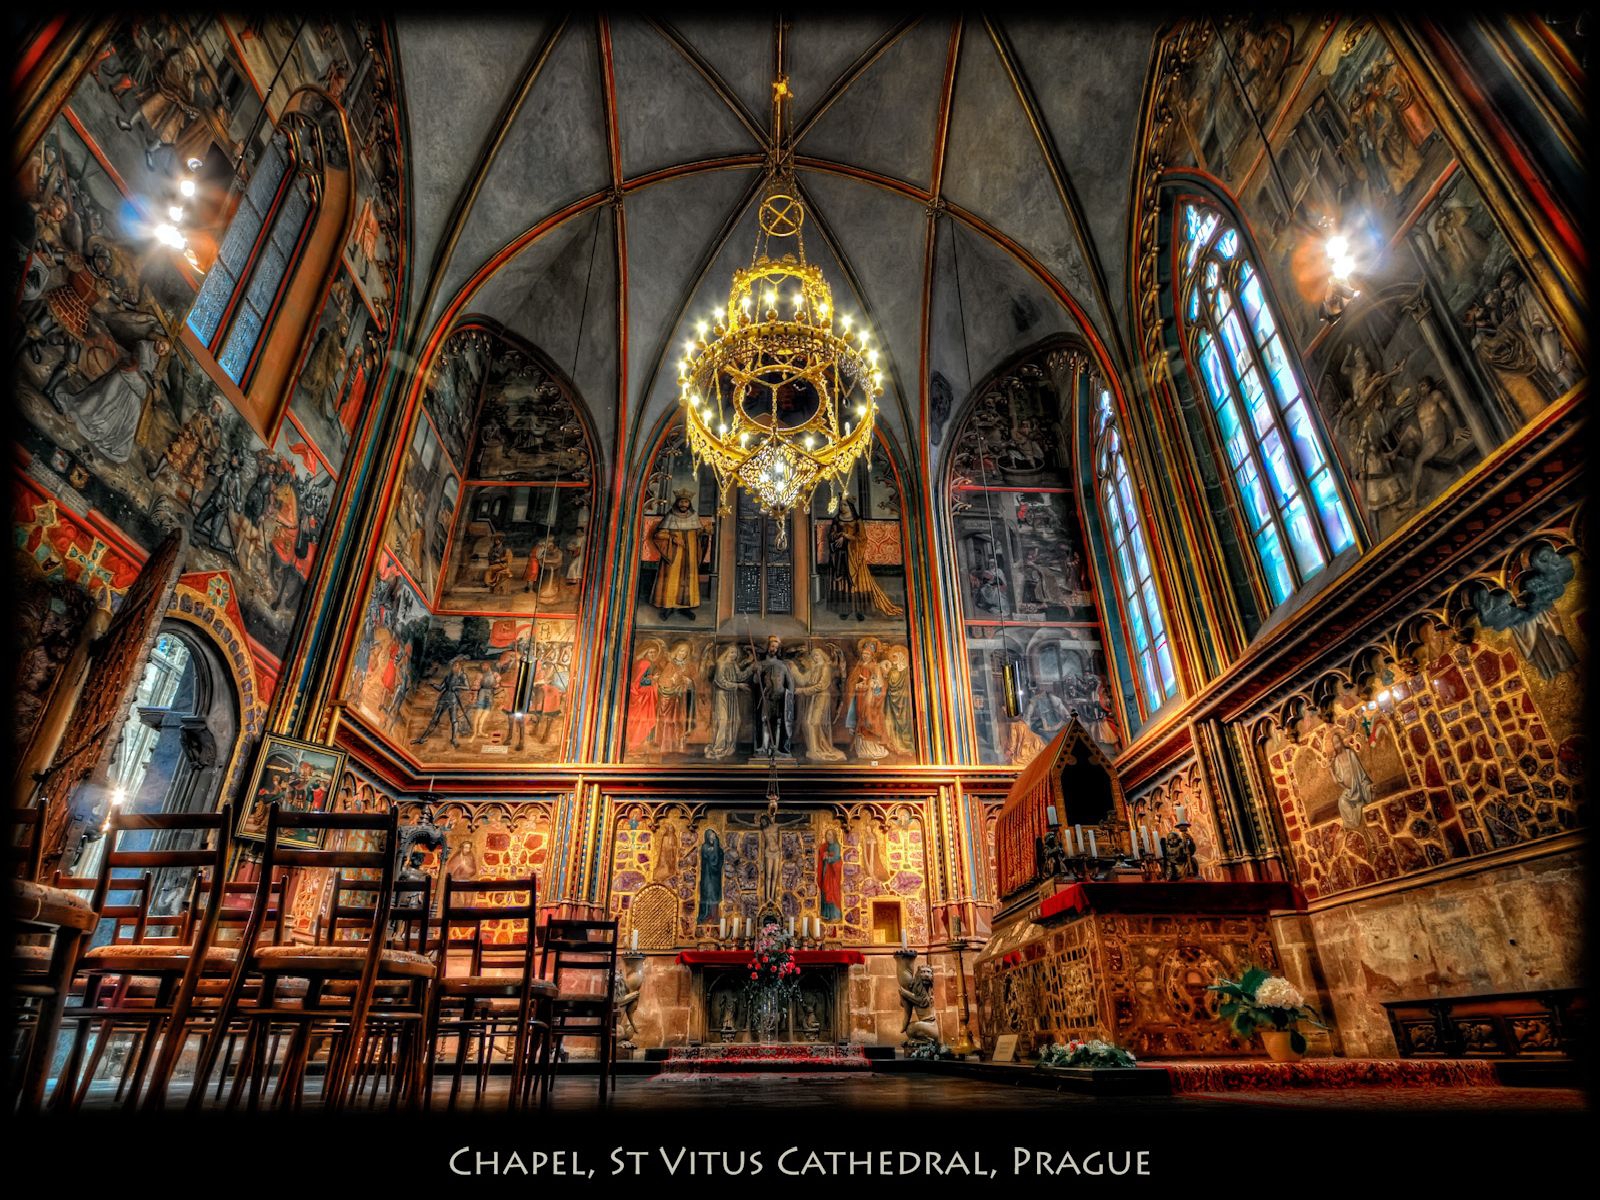 prague, religious, st vitus cathedral, arch, cathedral, chandelier, church, hdr, cathedrals